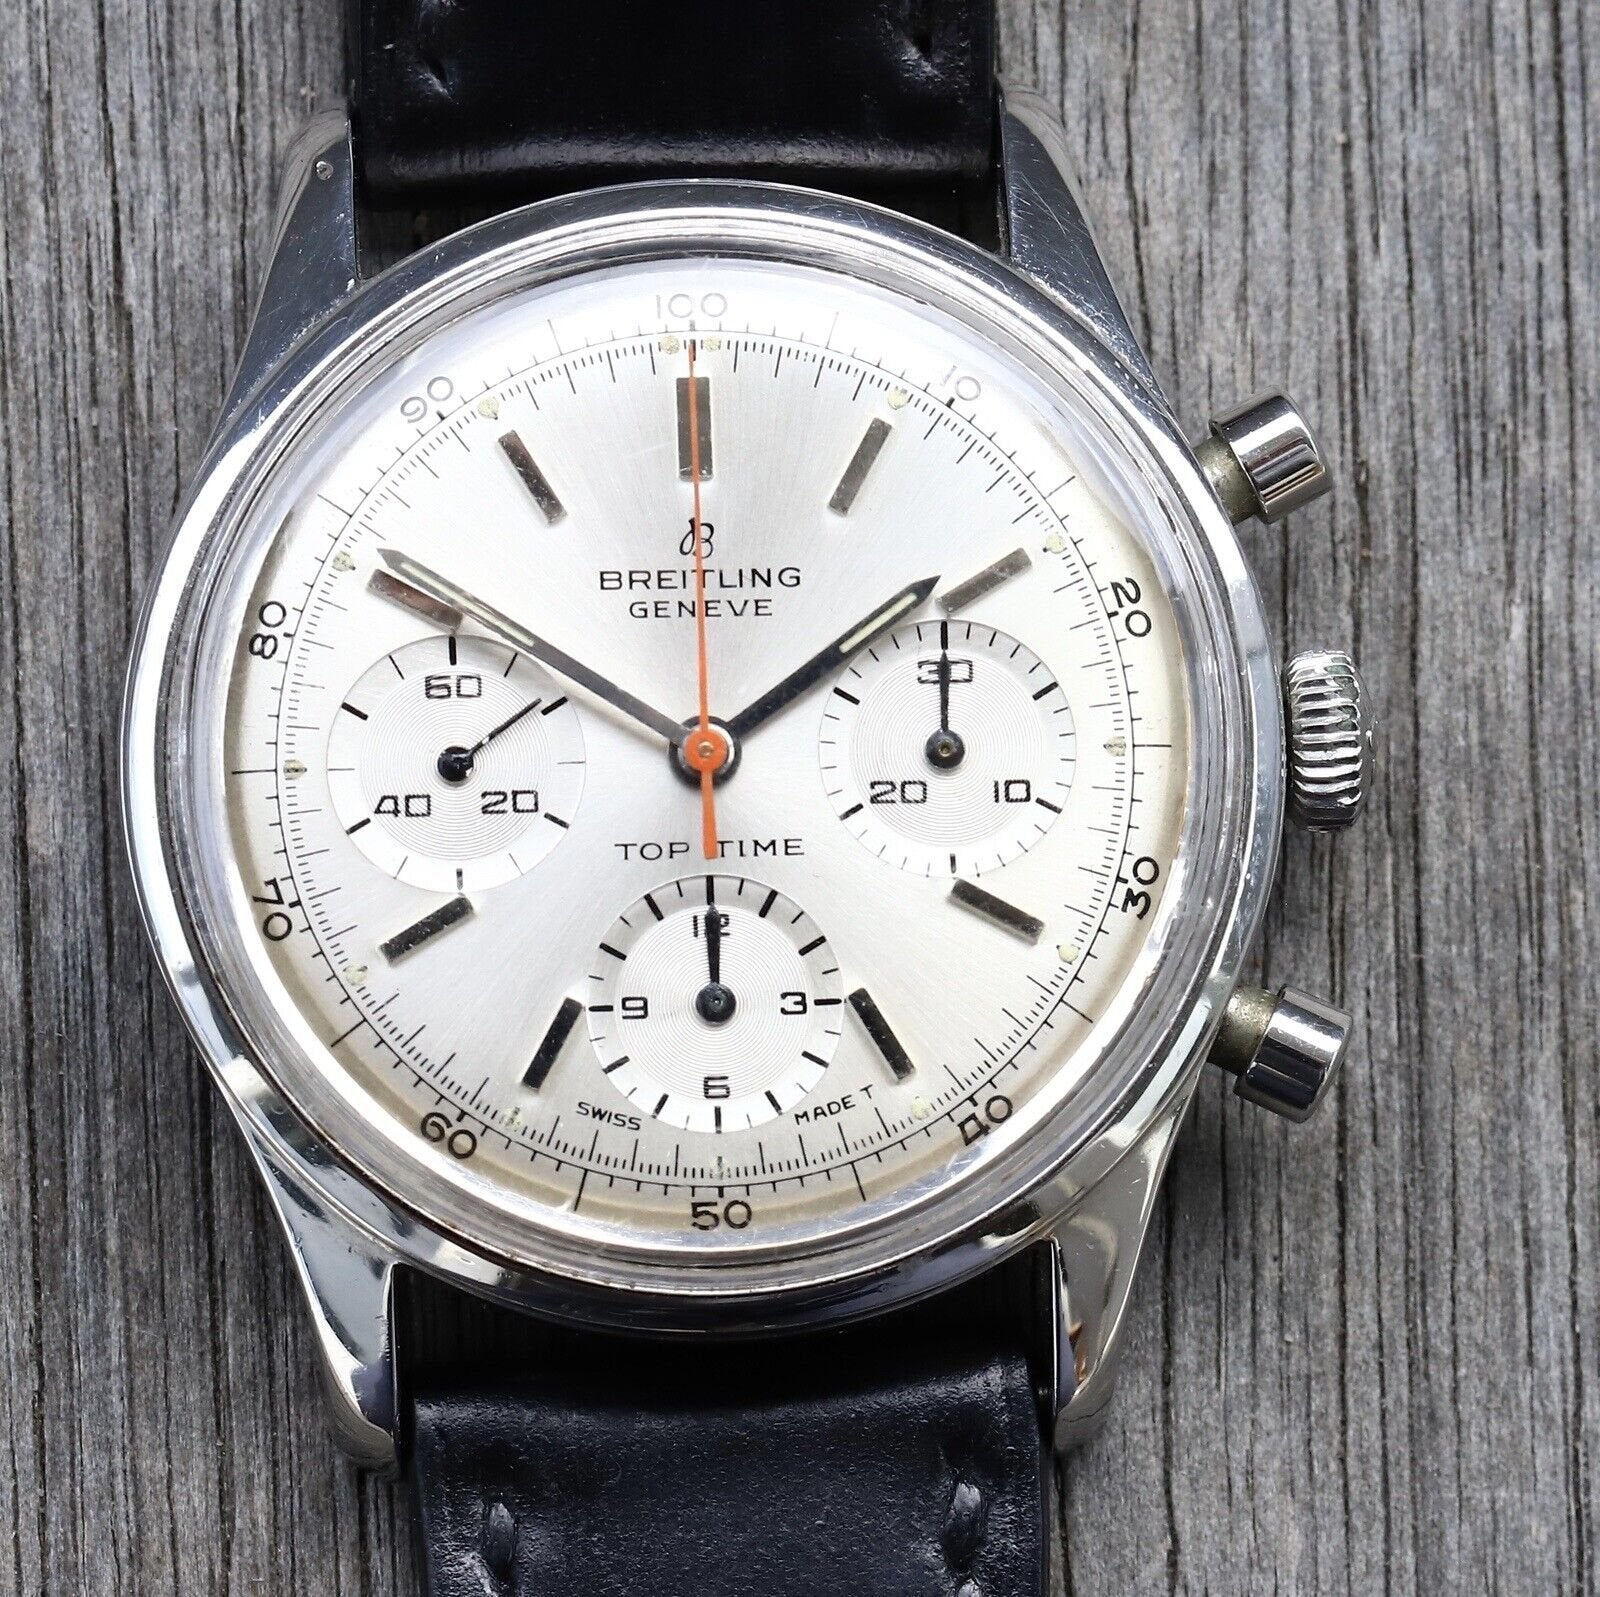 Breitling_Top_Time_Reference_810_-_1960_27s_Watch_Vault_01.jpg